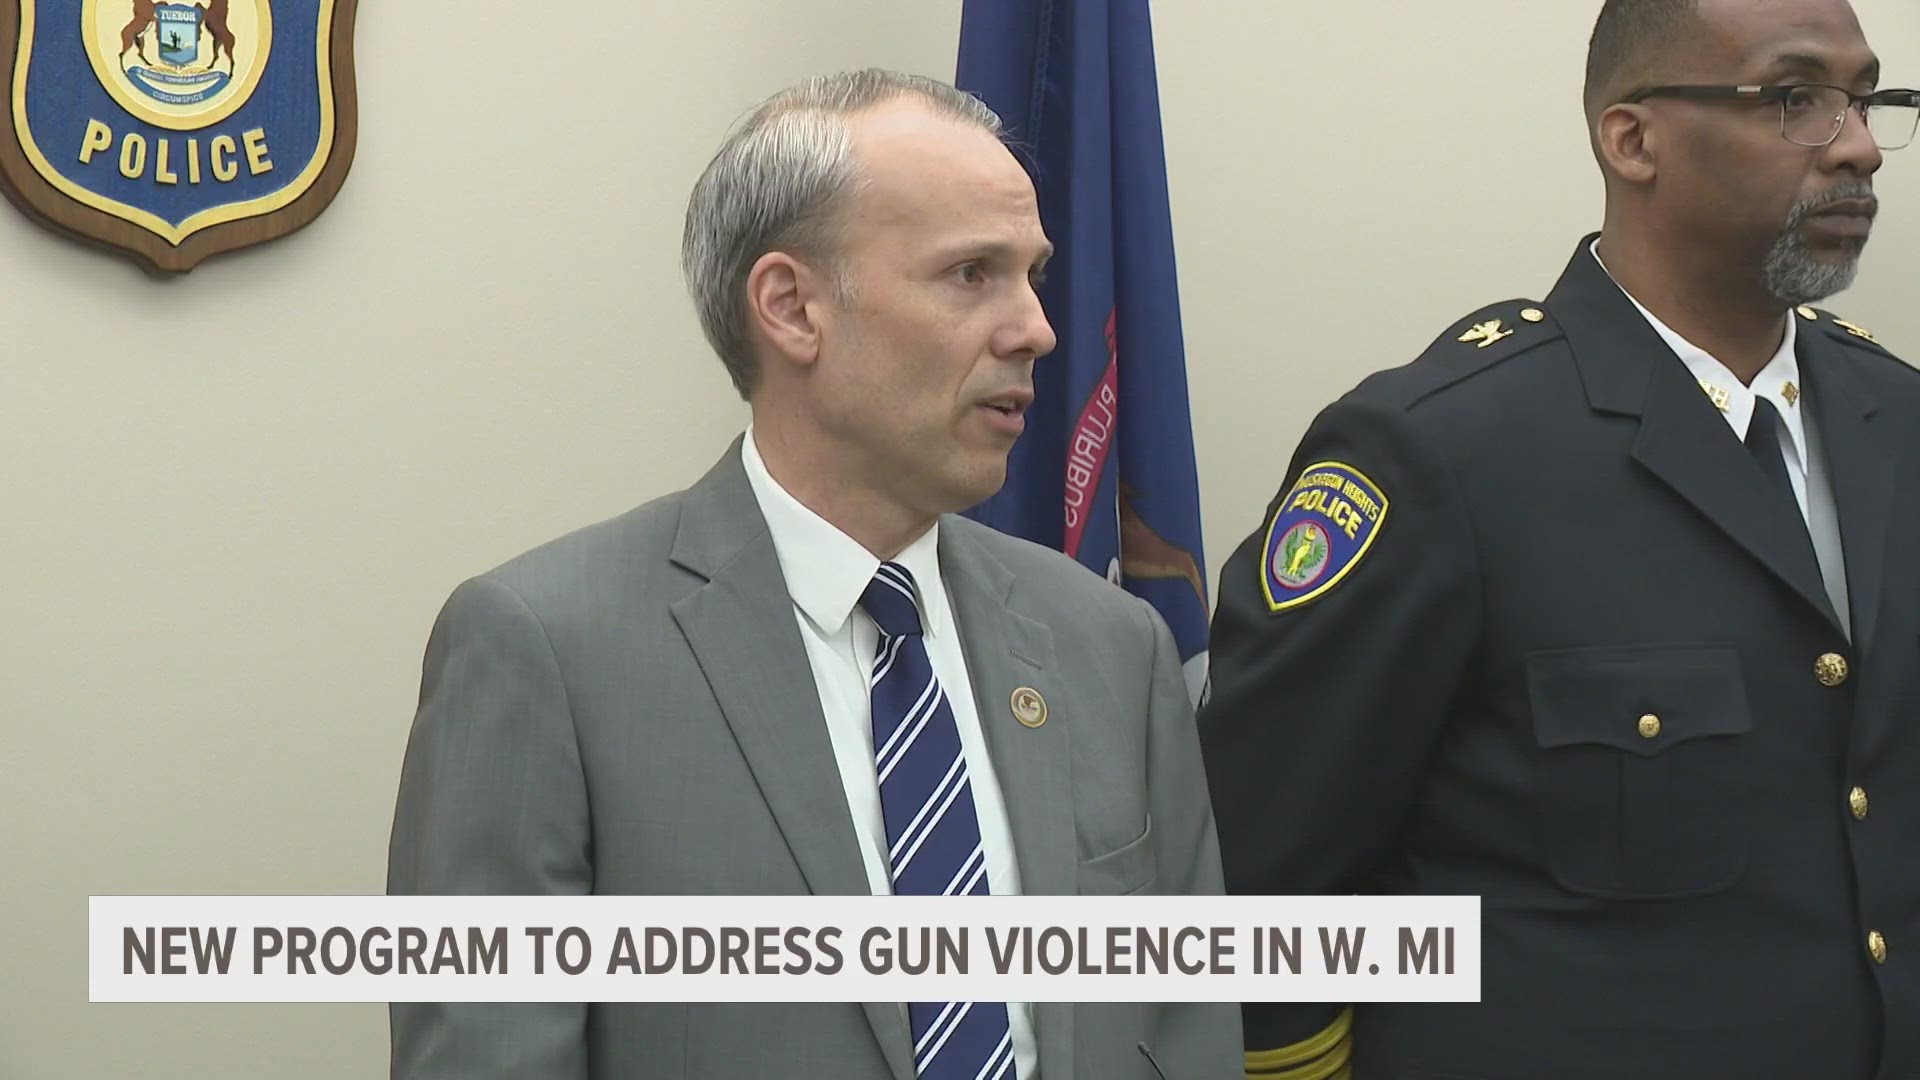 The U.S. Attorney for the Western District of Michigan announced the program today alongside many local police chiefs.